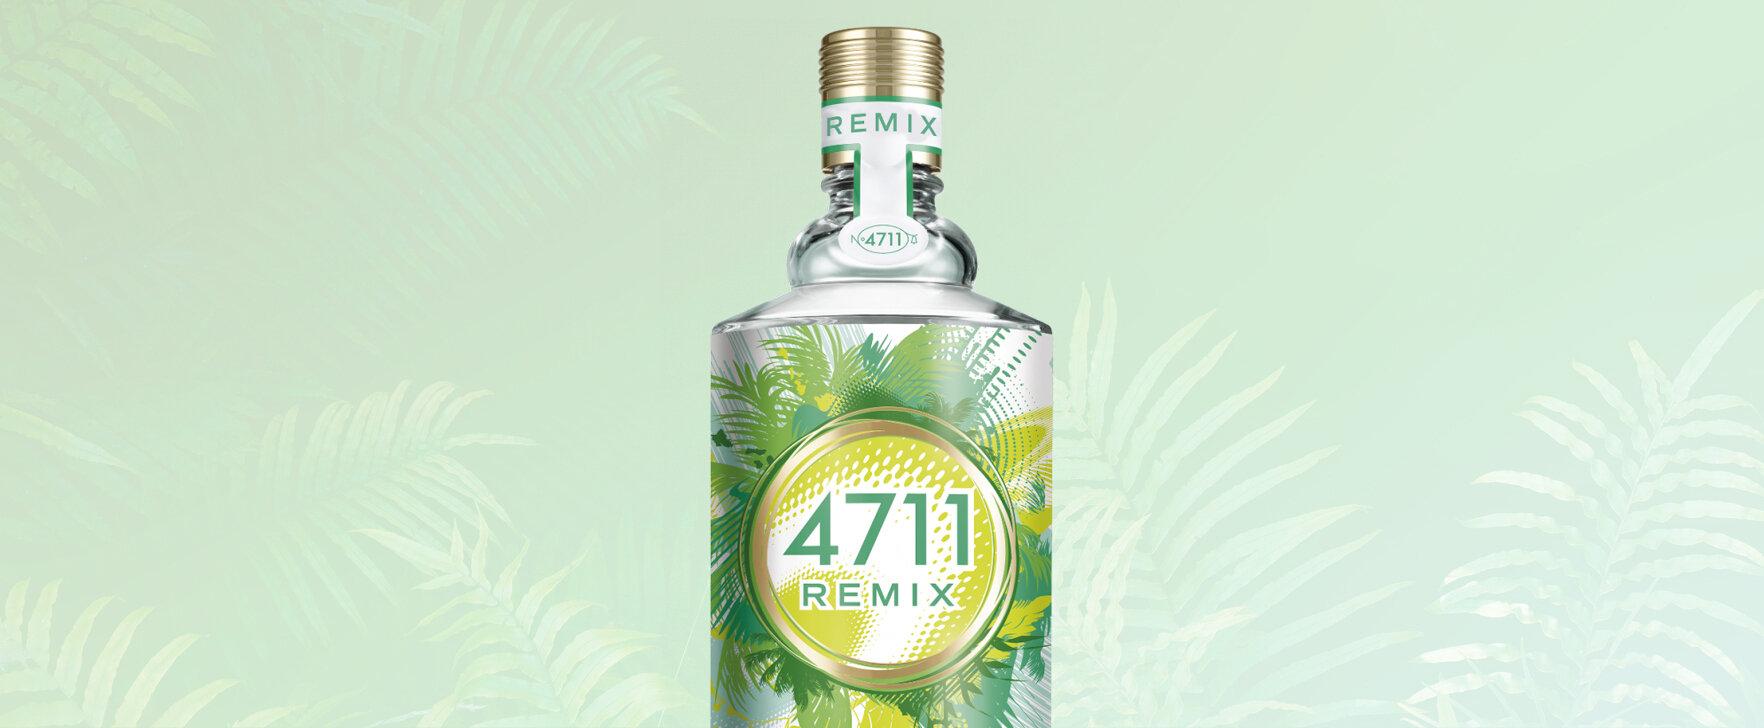 A Summer Adventure in Bali: The New Eau de Cologne "Remix Green Oasis" From 4711